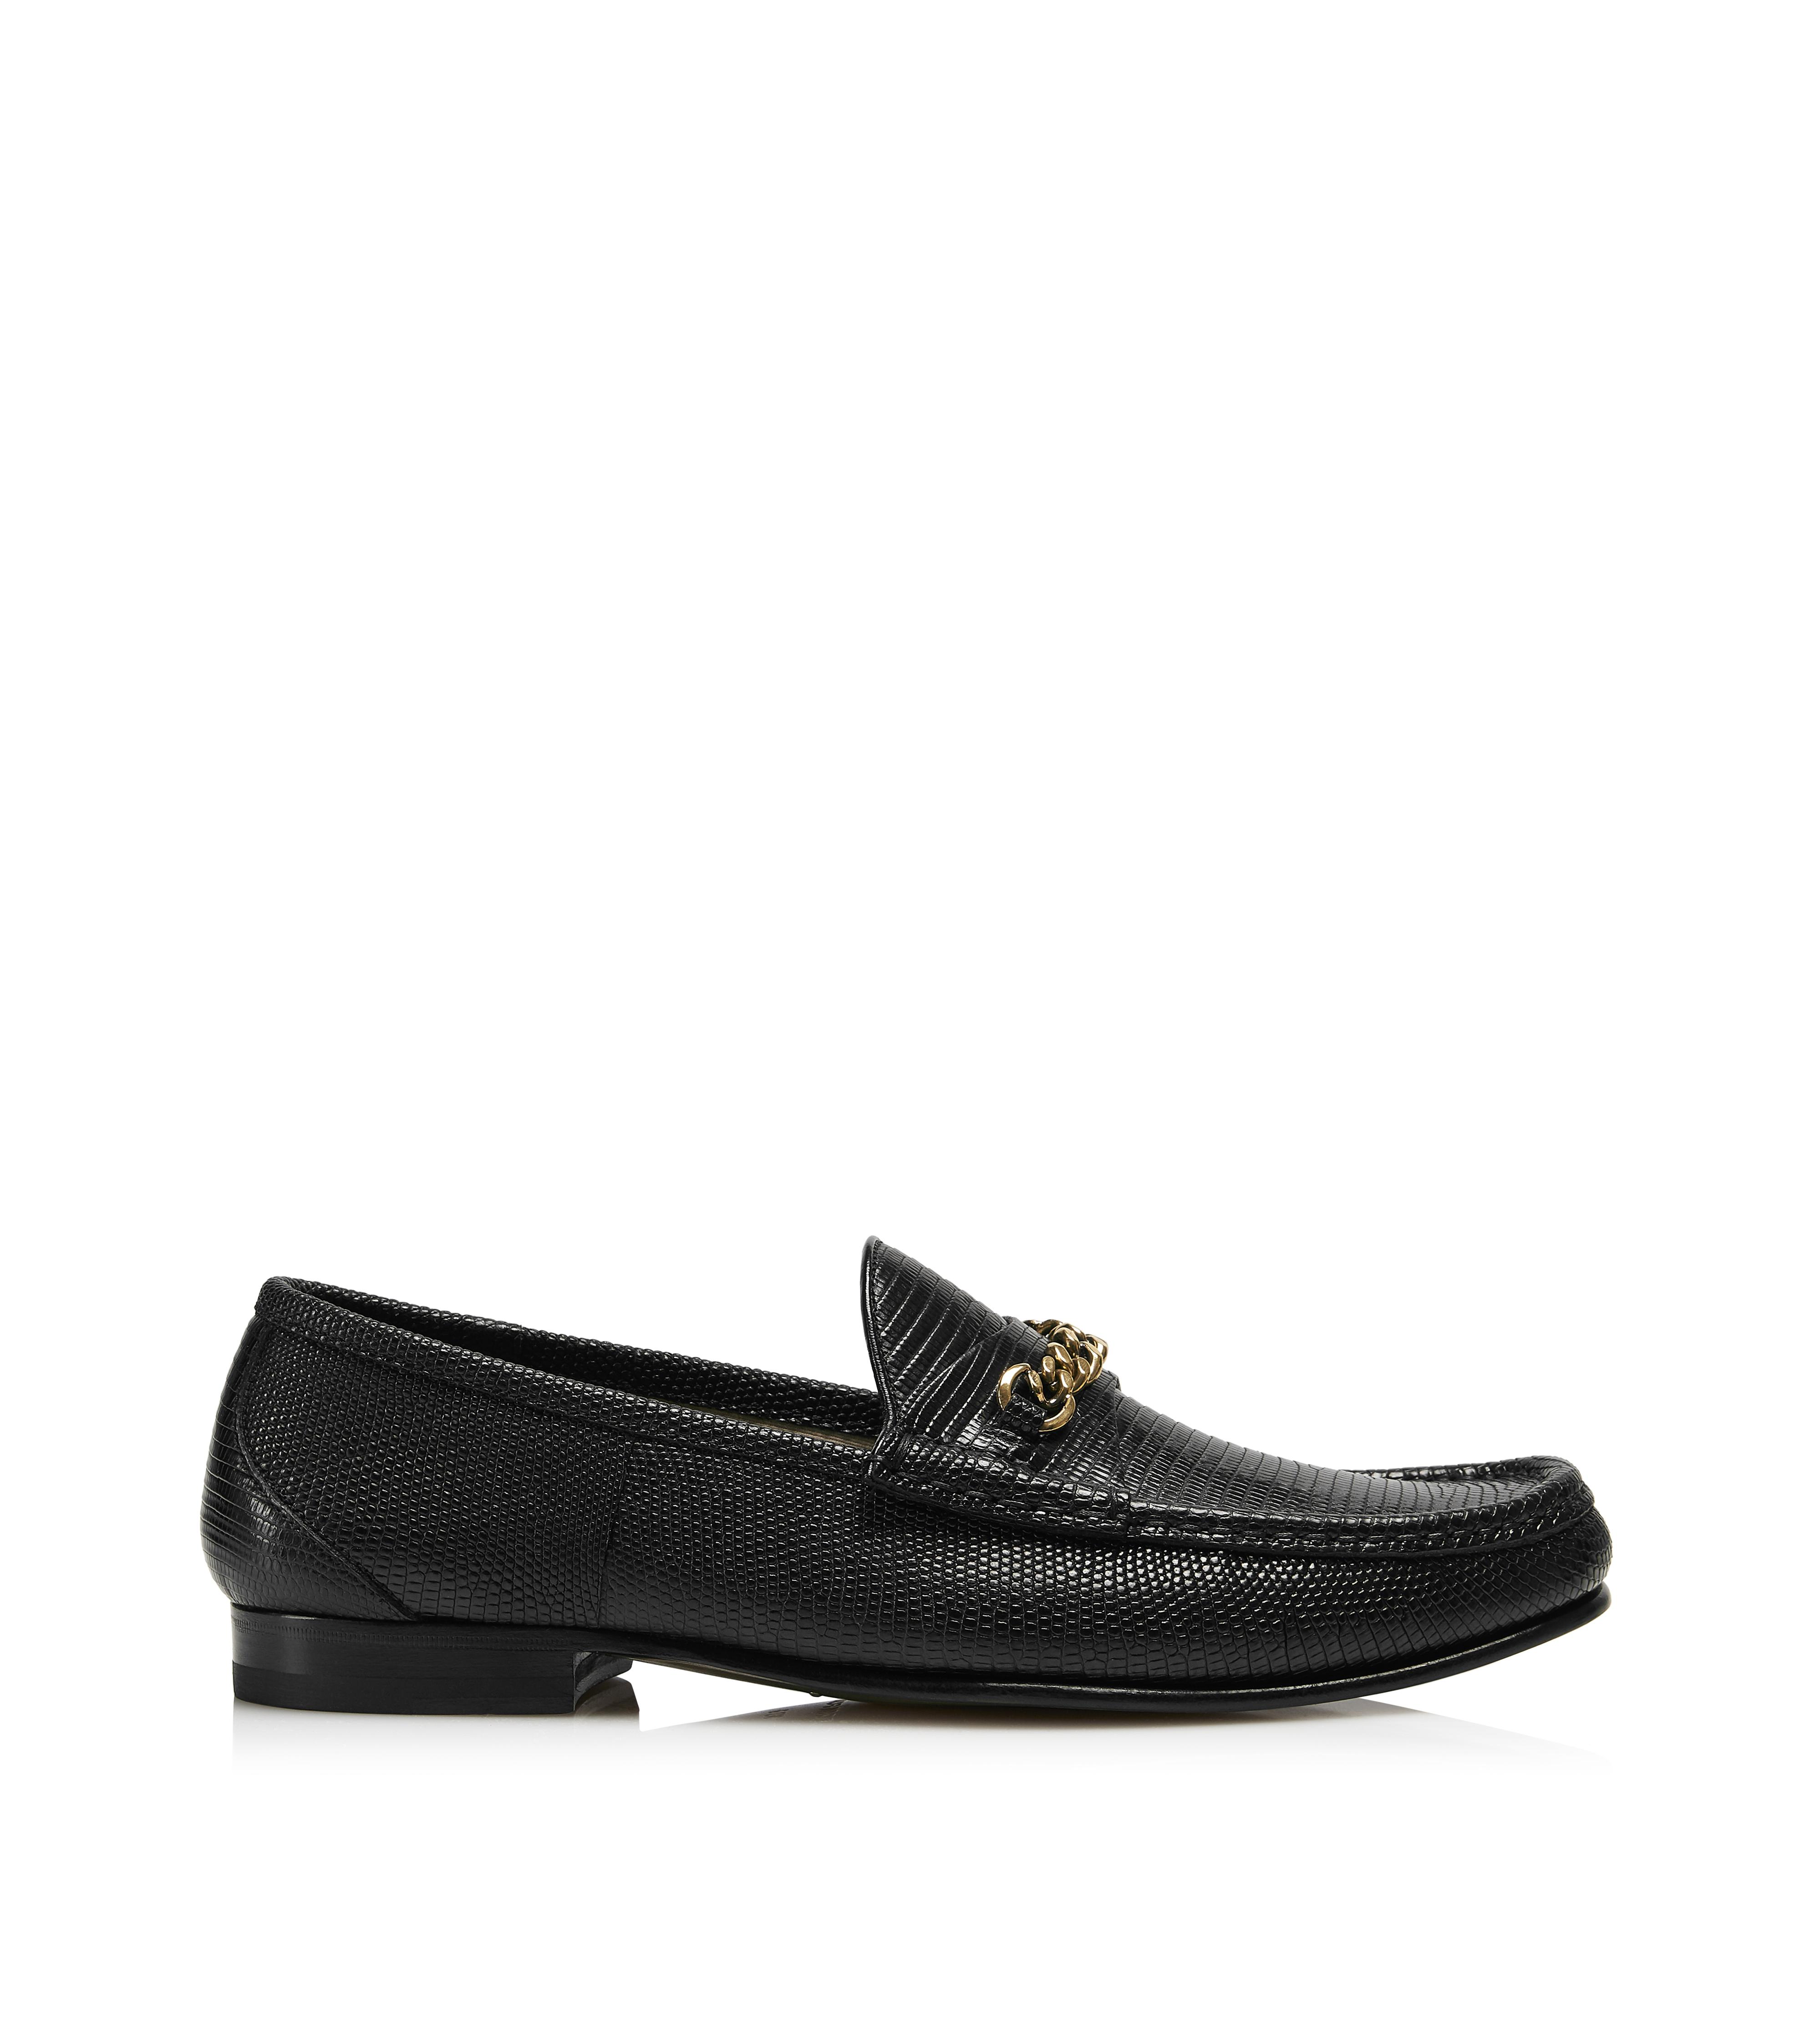 Loafers - Men's Shoes | TomFord.com